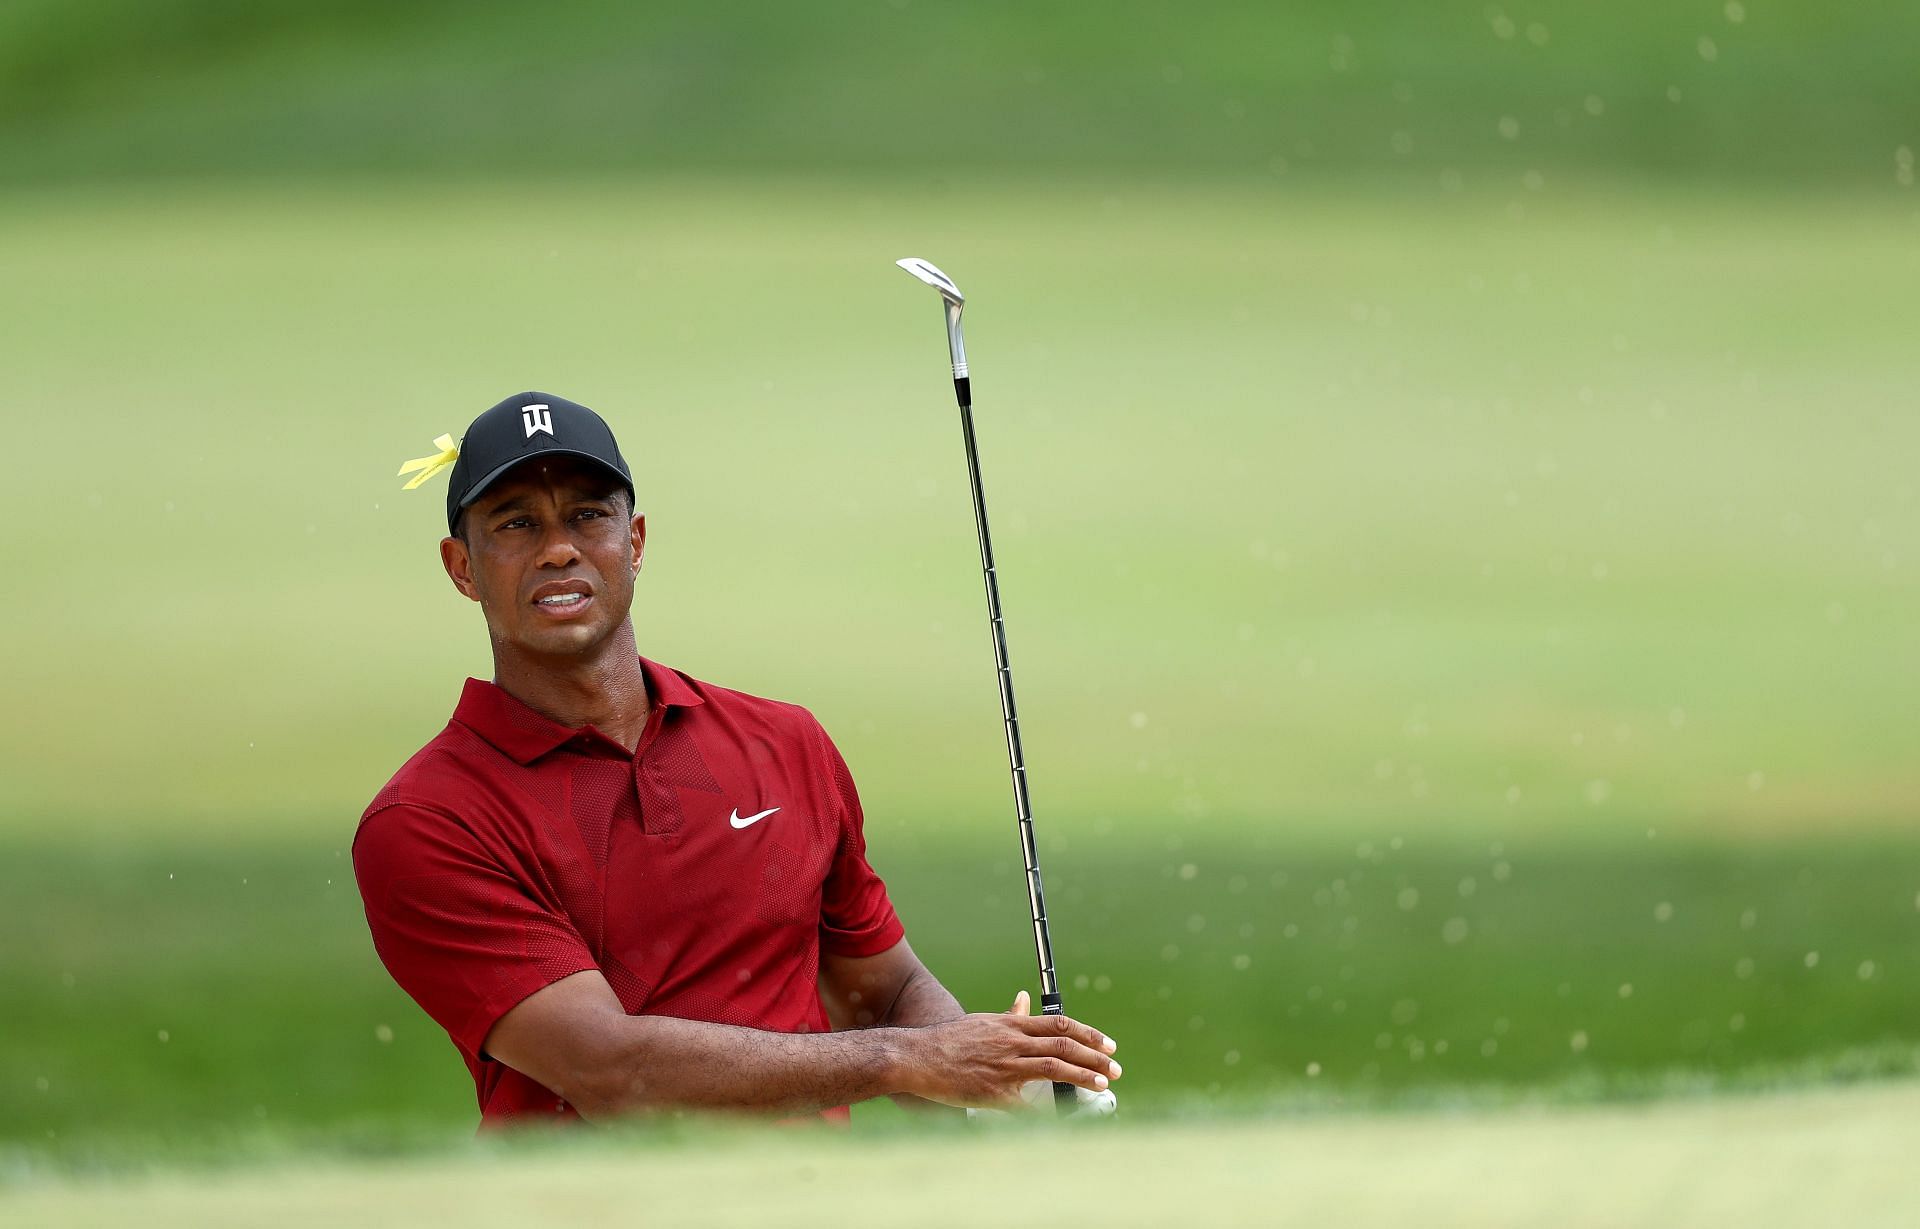 Tiger Woods at the 2020 Memorial Tournament (Image via Getty).